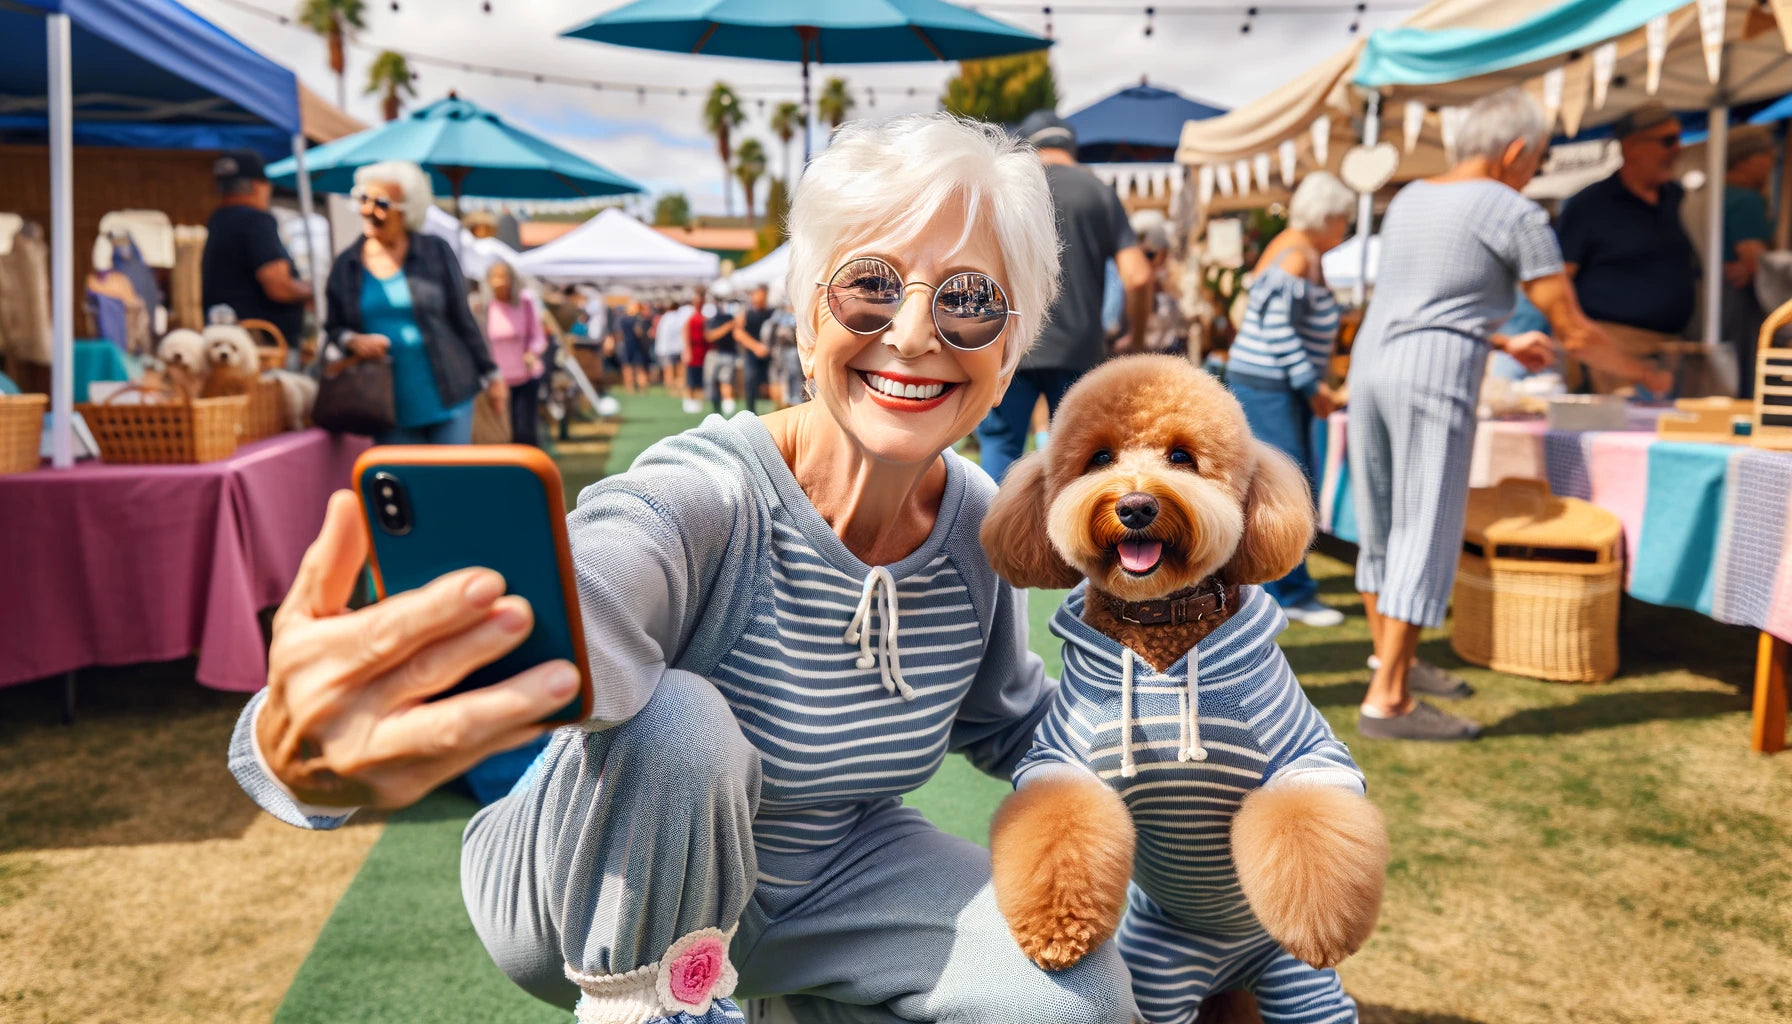 Baby Boomer taking a selfie with their Mini Goldendoodle at a community event, both wearing matching outfits emphasizing the breed's popularity.